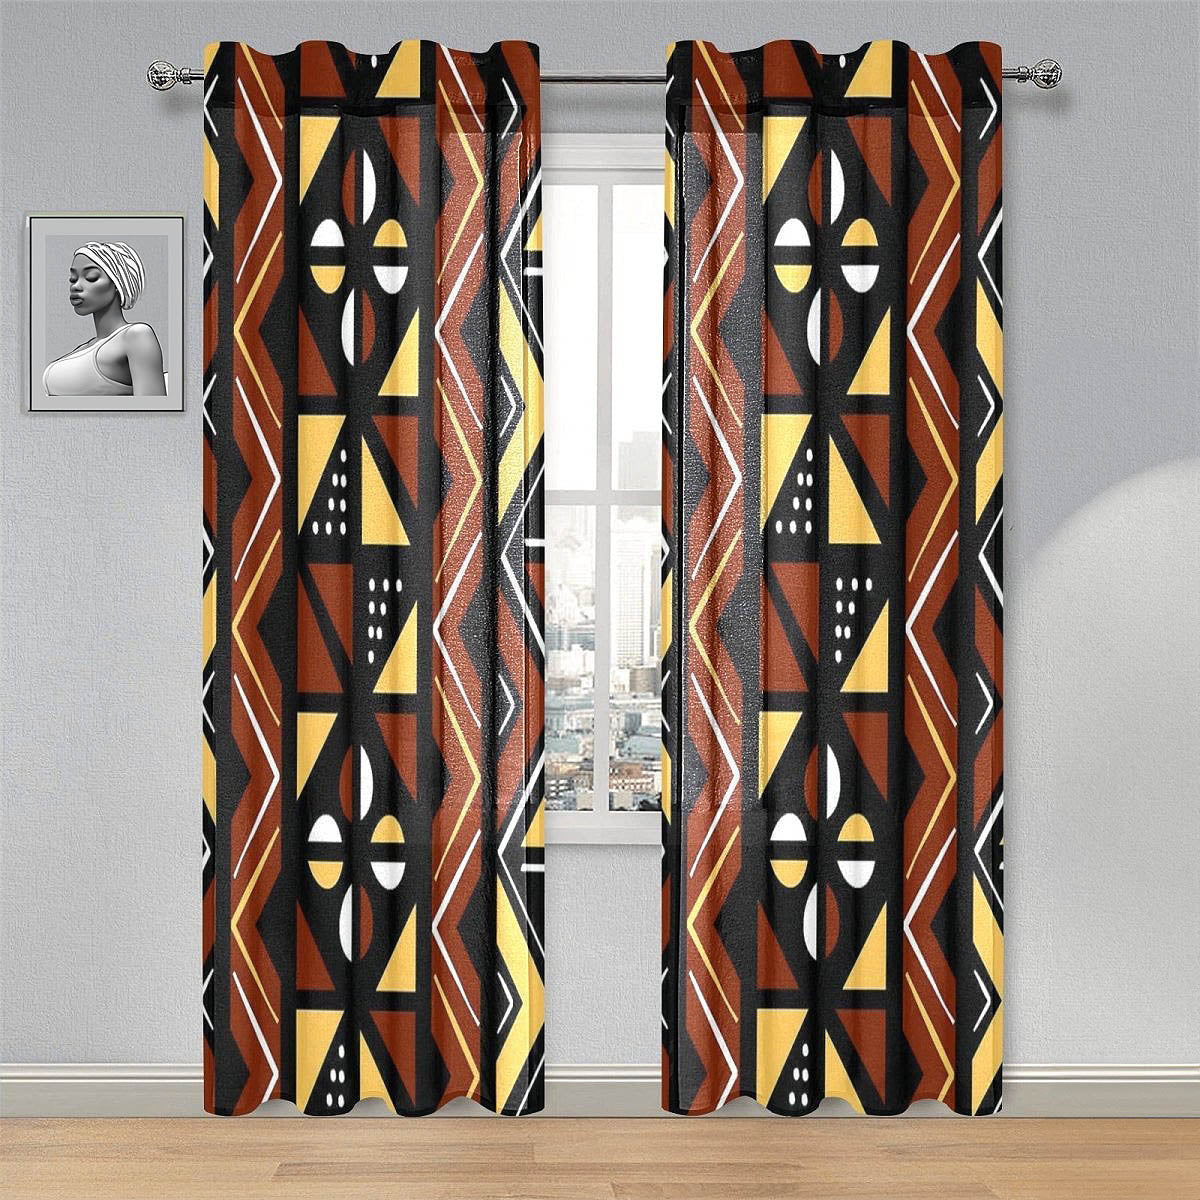 African Mud cloth Curtain Tribal Print (Two-Piece) - Bynelo